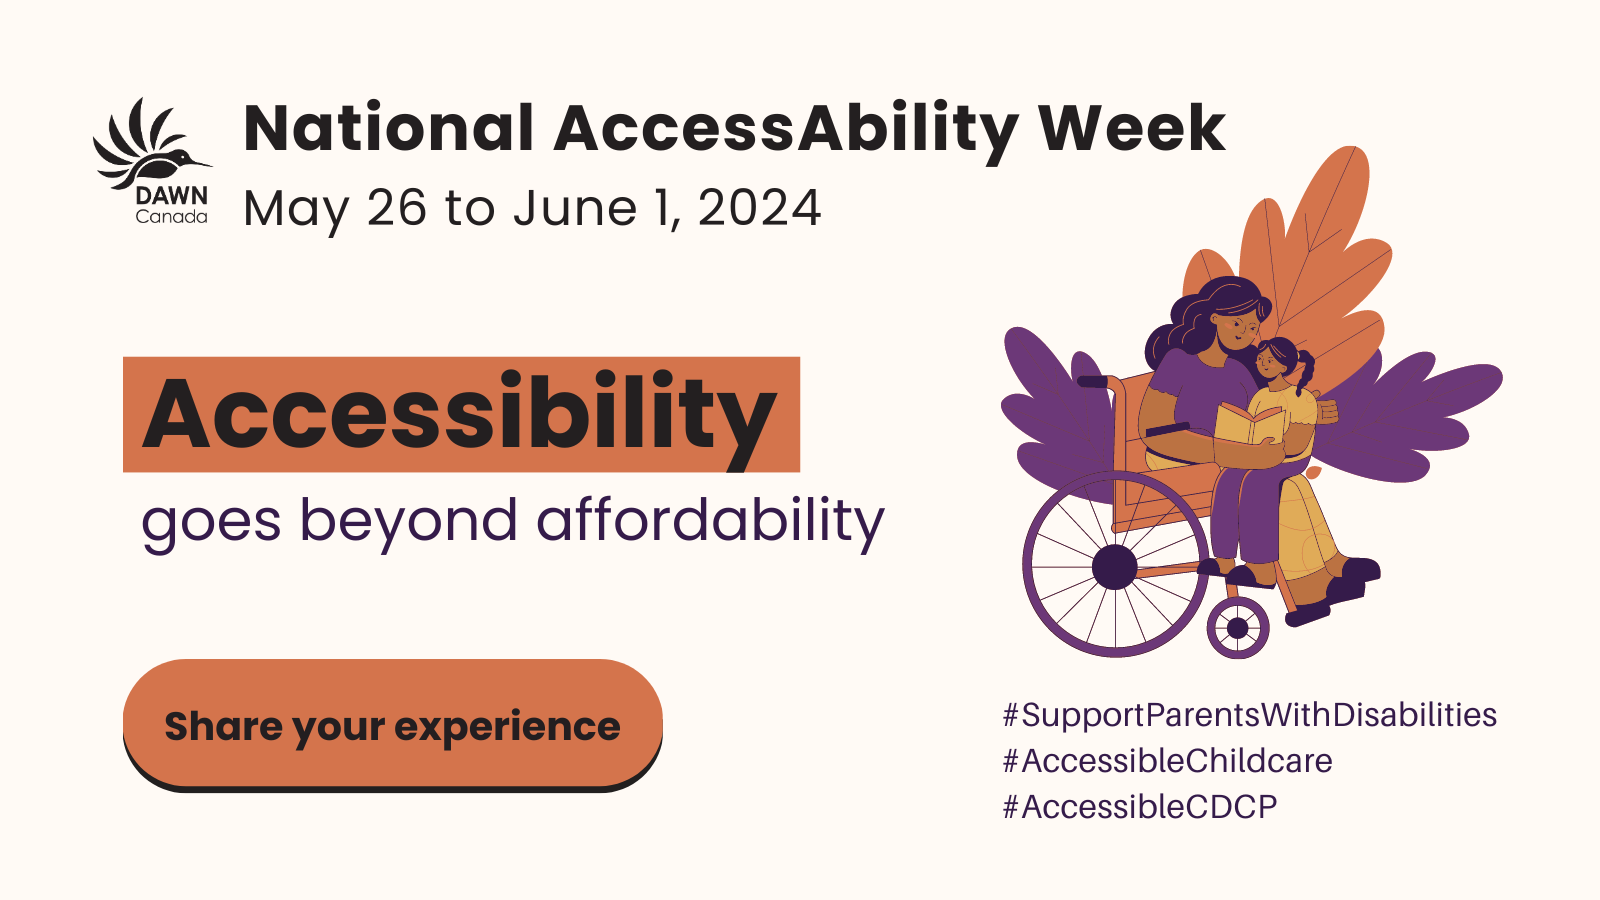 National AccessAbility Week 2024 - Take our survey on accessible childcare and dental care!